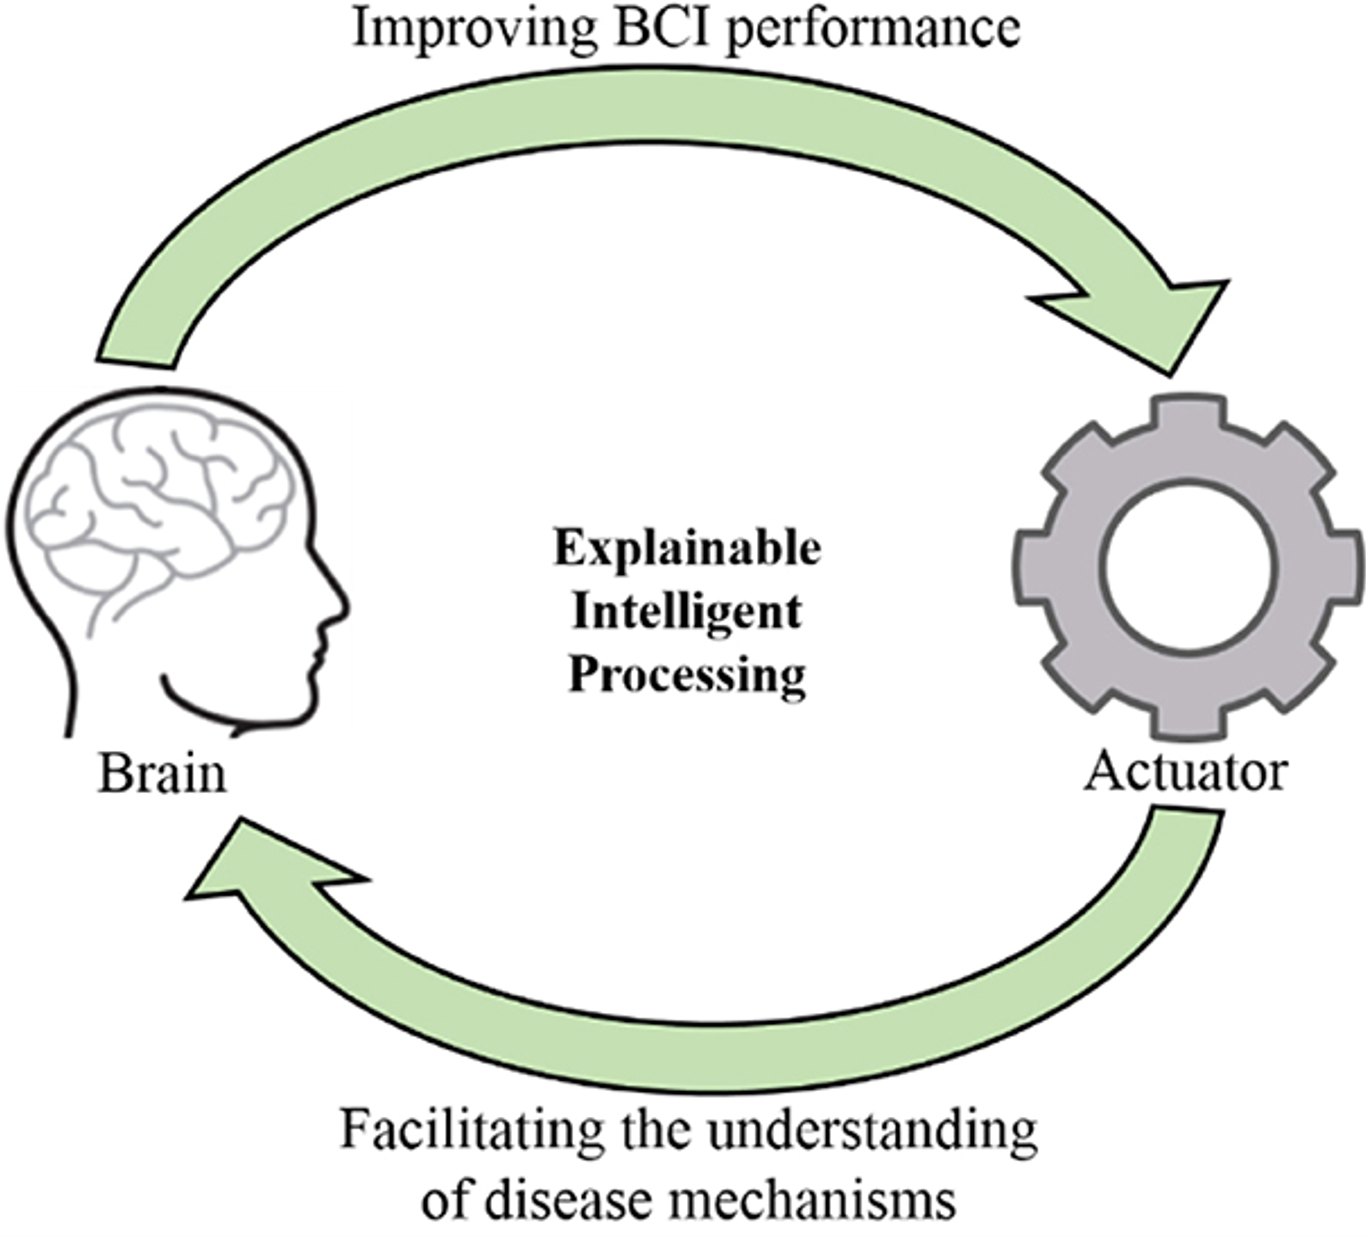 Diagram showing a brain on the left, and an actuator on the right, with arrows at the top and bottom of the image, forming a loop. The brain feeds 'Improving BCI performance' into the actuator, and the actuator feeds 'facilitating the understanding of disease mechanisms' into the brain. At the centre is text saying 'Explainable Intelligent Processing'.